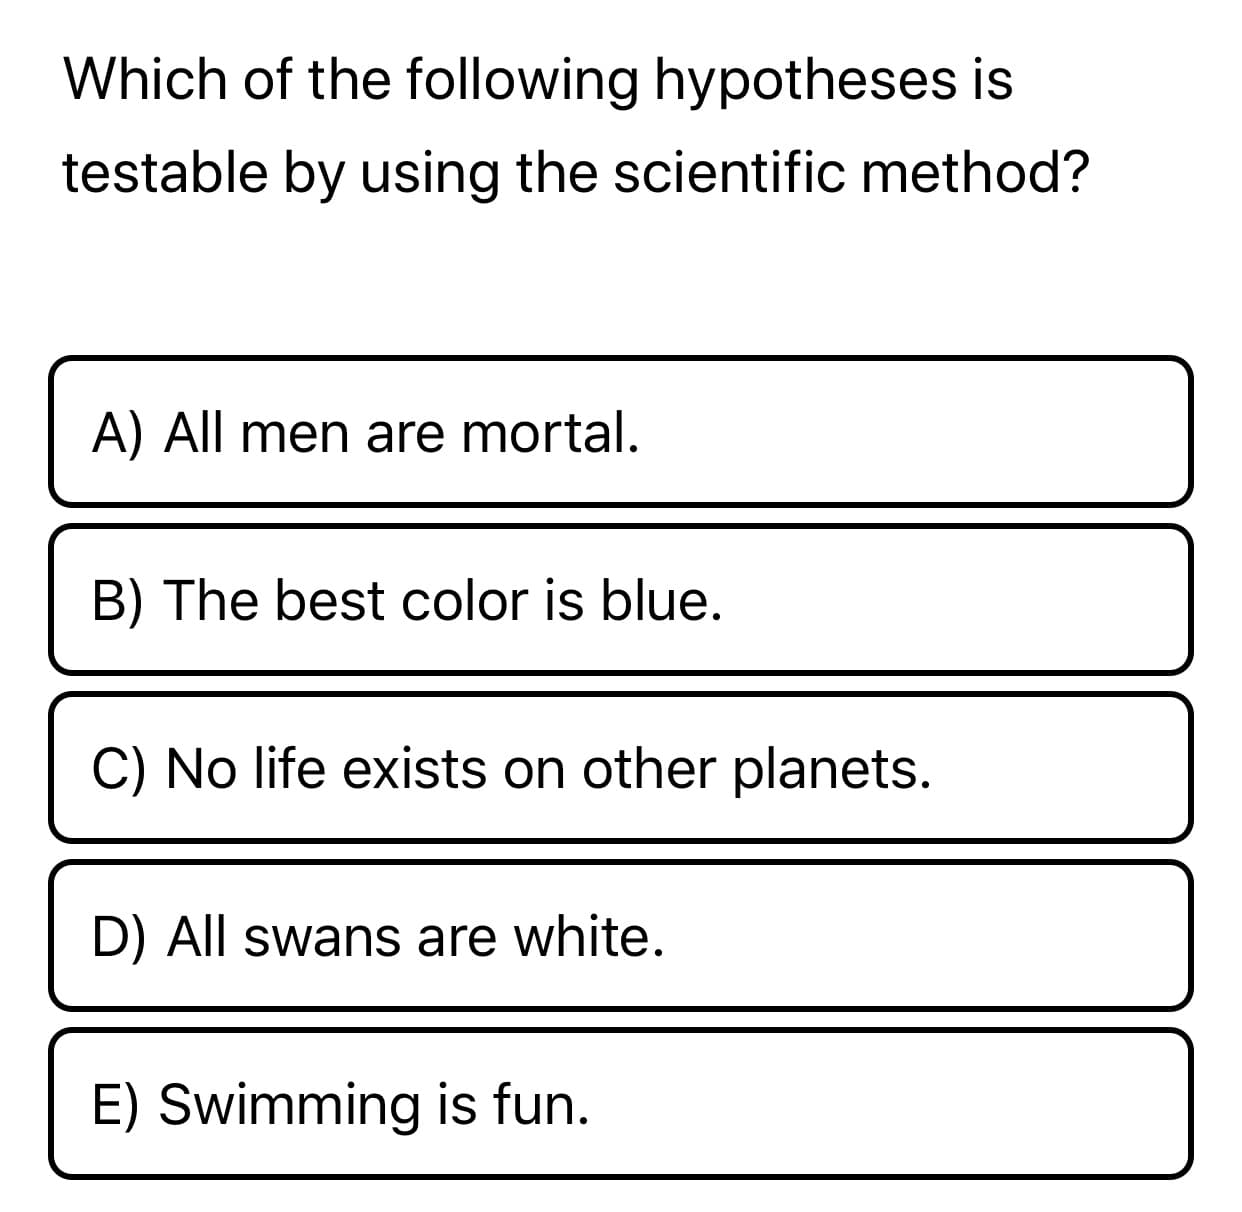 Which of the following hypotheses is
testable by using the scientific method?
A) All men are mortal.
B) The best color is blue.
C) No life exists on other planets.
D) All swans are white.
E) Swimming is fun.
